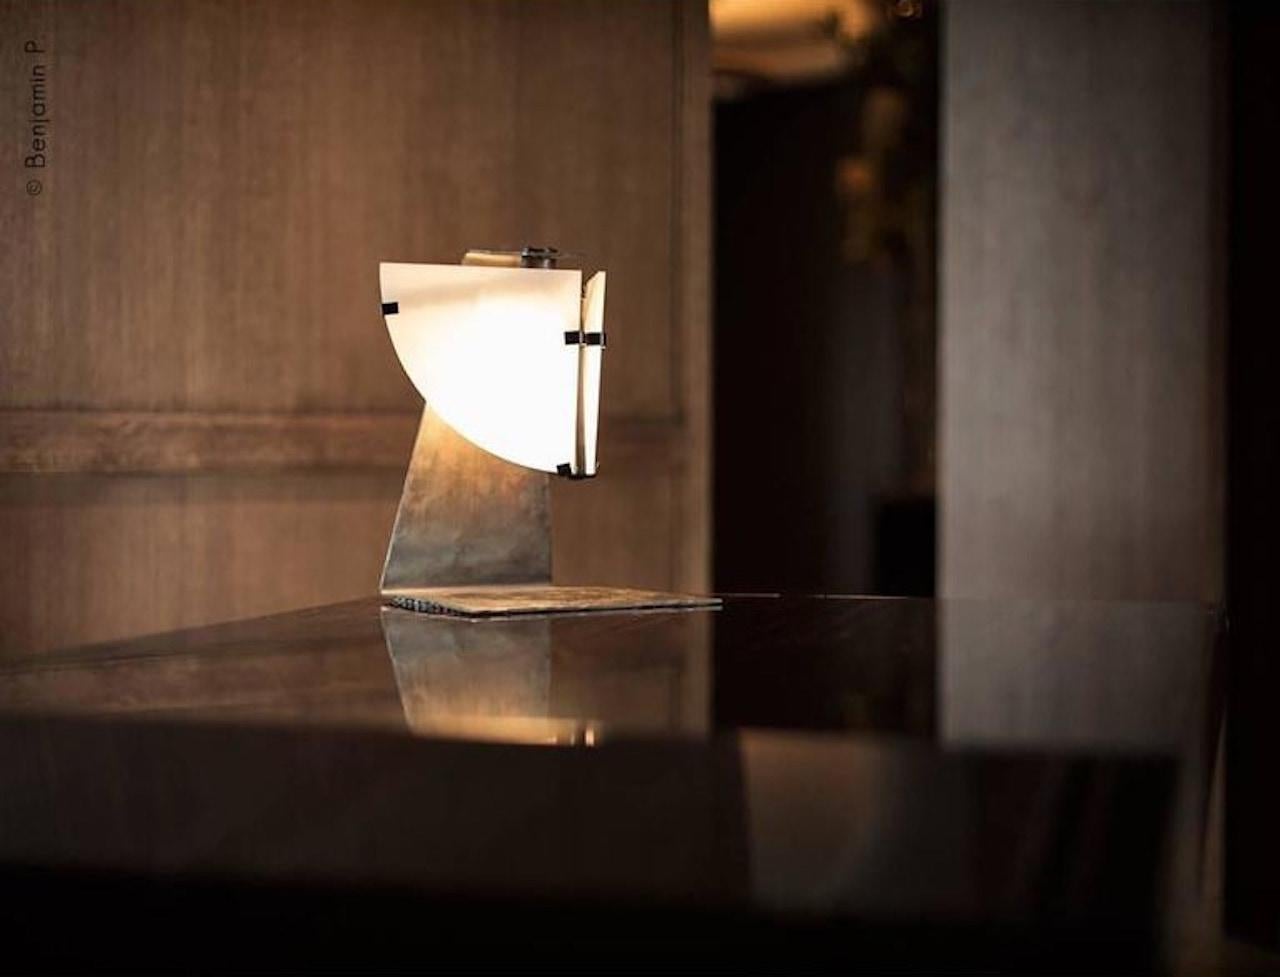 Designed in 1922, this pivoting lamp is symbolic of Pierre Chareau's cubist inspiration. Like a statue, it stares out from the two alabaster panels forming the face, the metal forming the body.